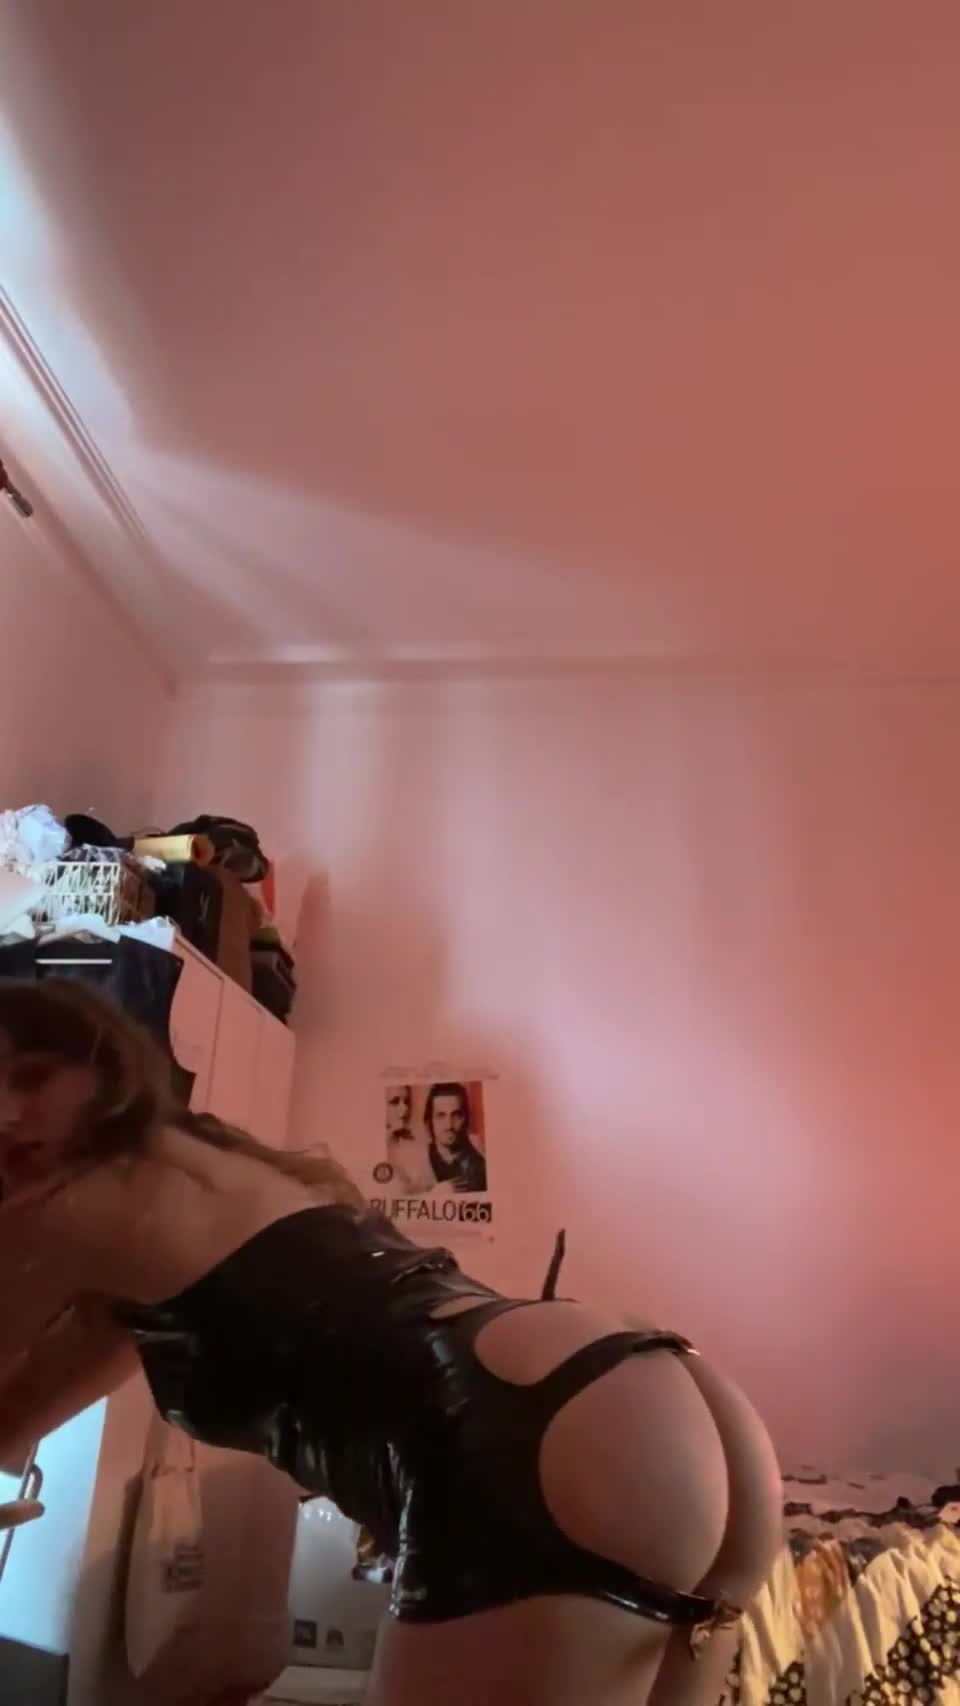 Fuck me hard and don’t pull out please 🙏🥺 : video clip